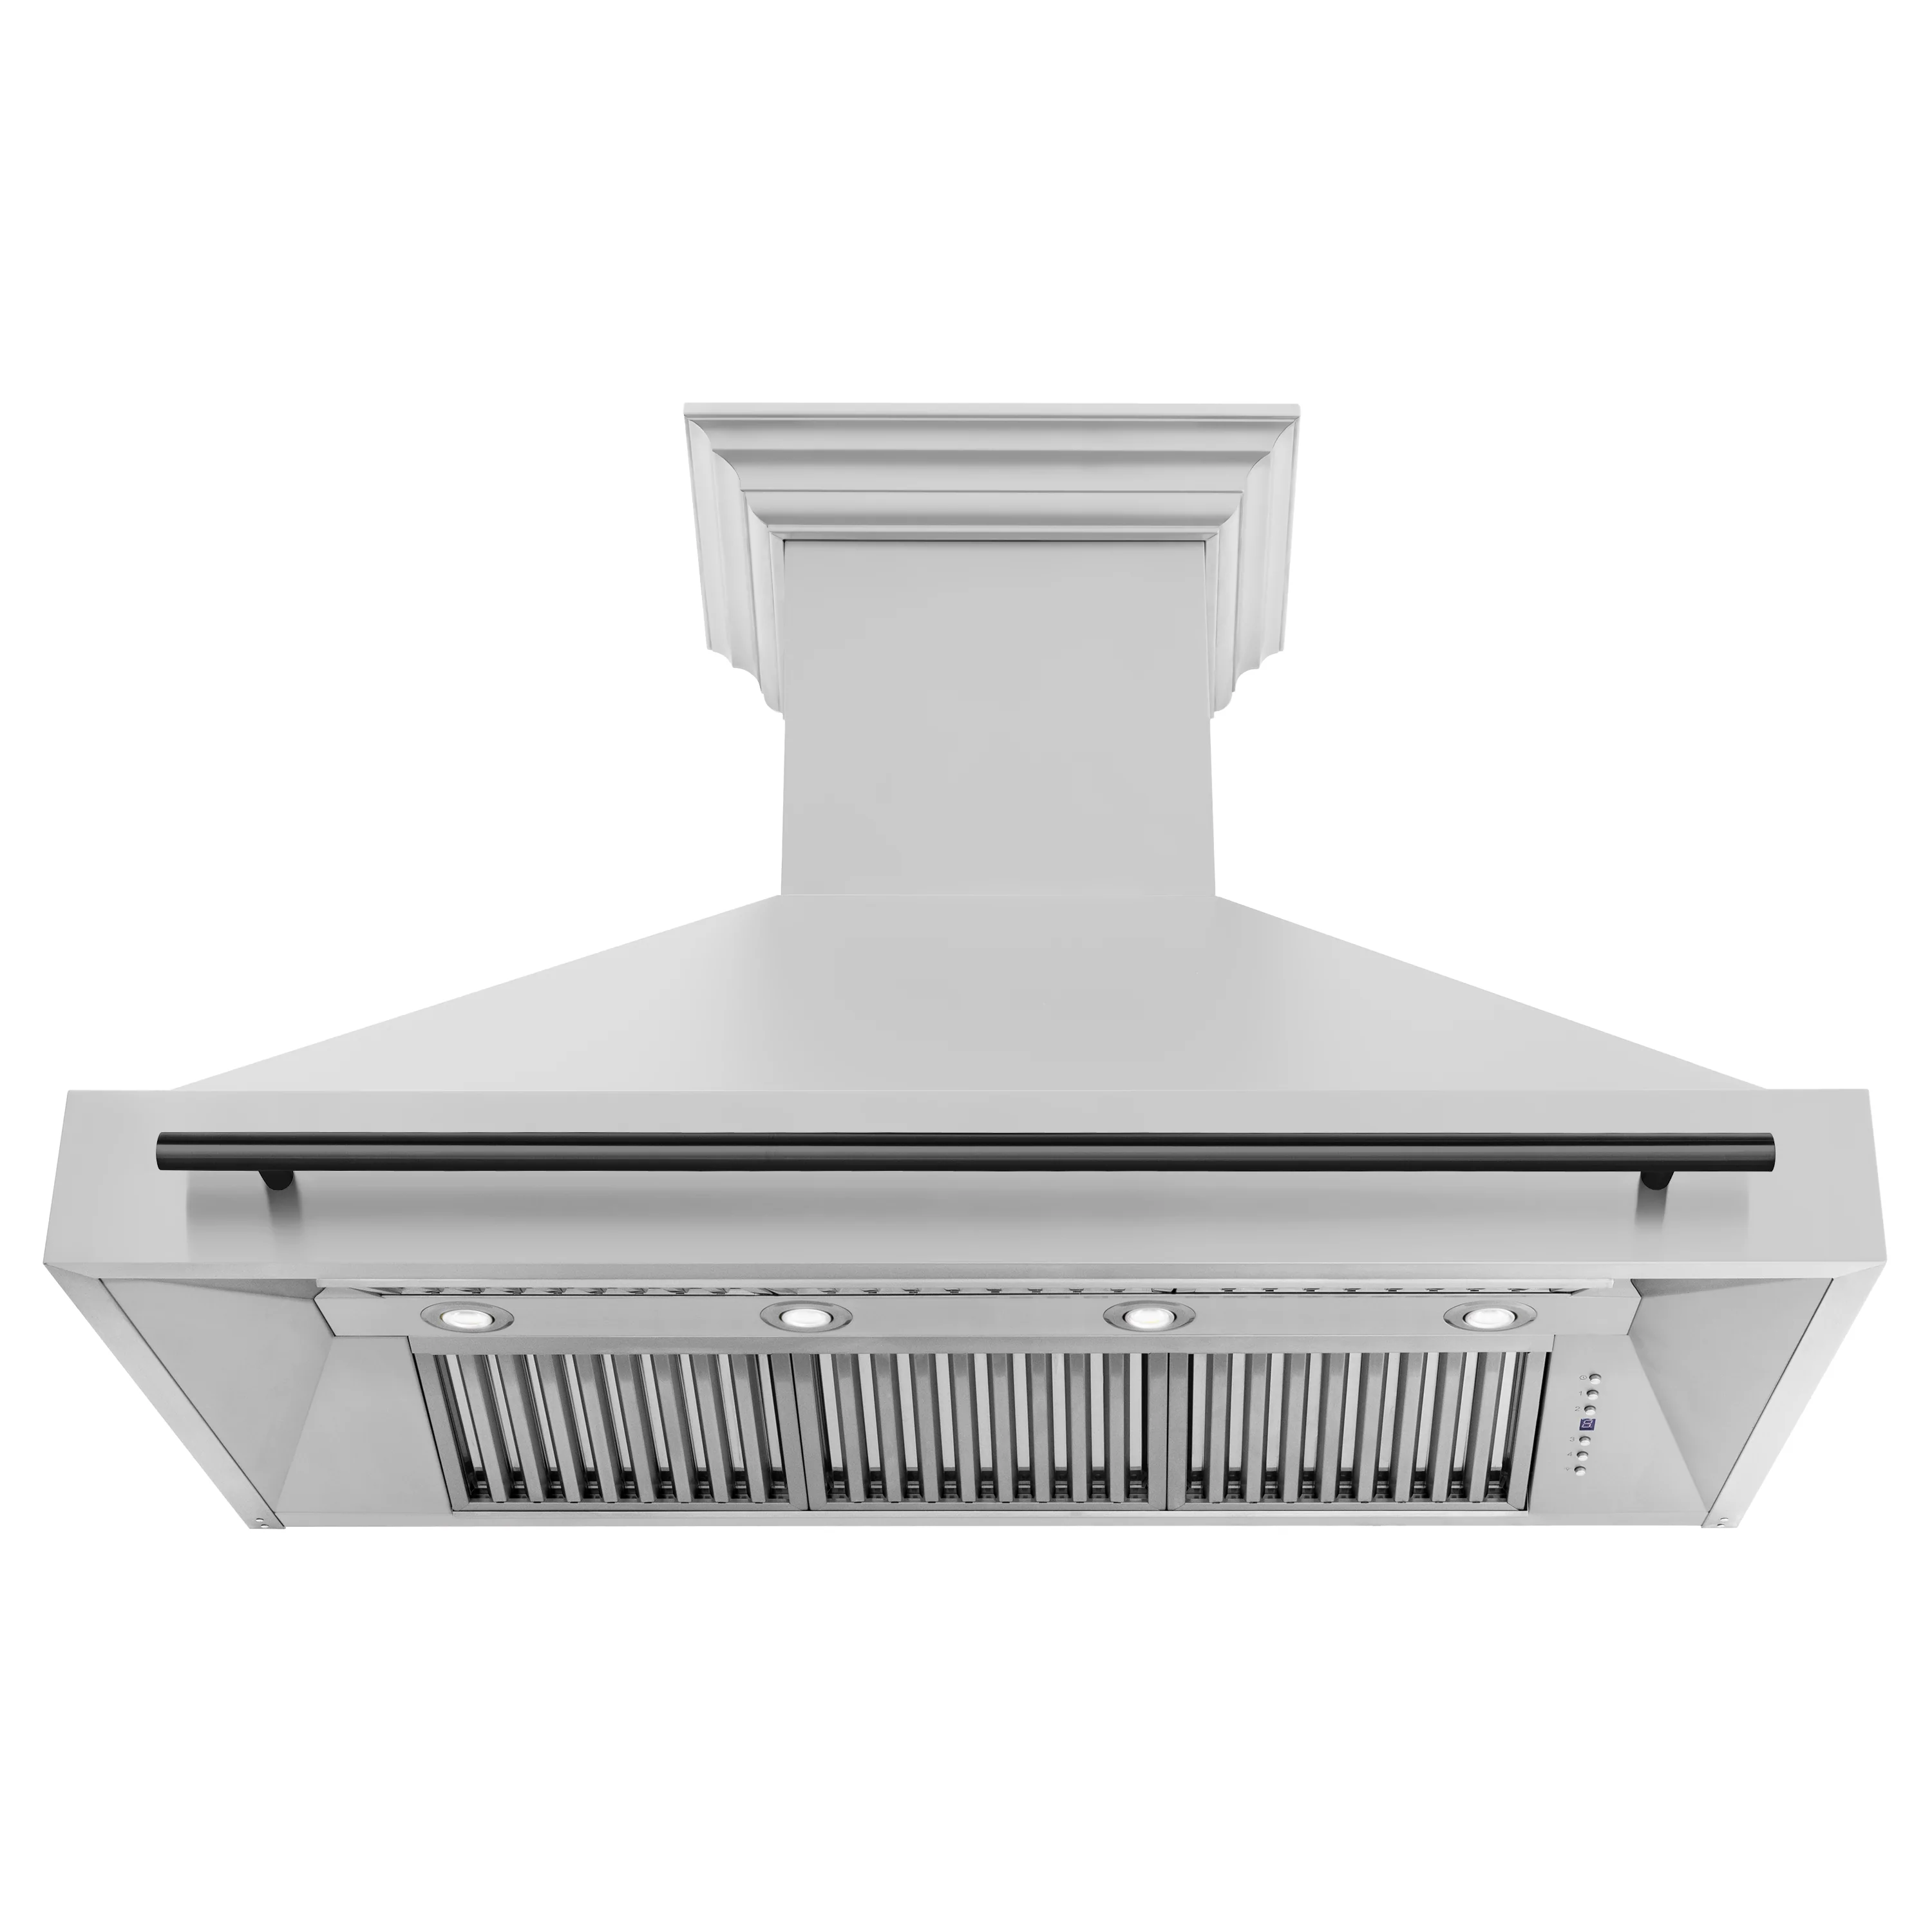 ZLINE 48 Inch Autograph Edition Stainless Steel Range Hood with Matte Black Handle, 8654STZ-48-MB